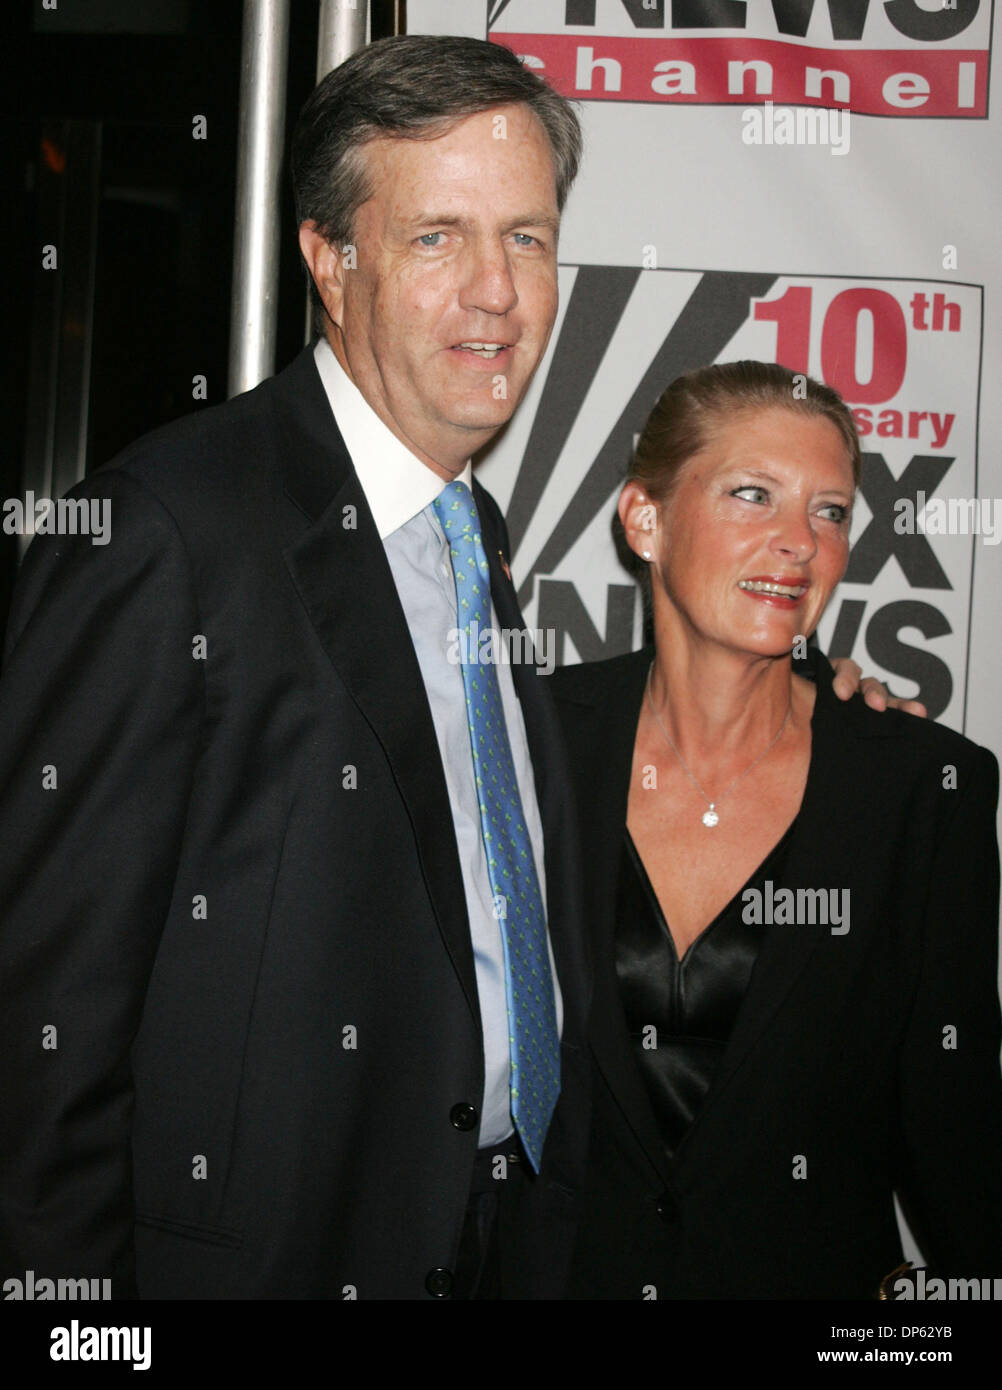 Oct 04, 2006; New York, NY, USA; News personality BRIT HUME and wife